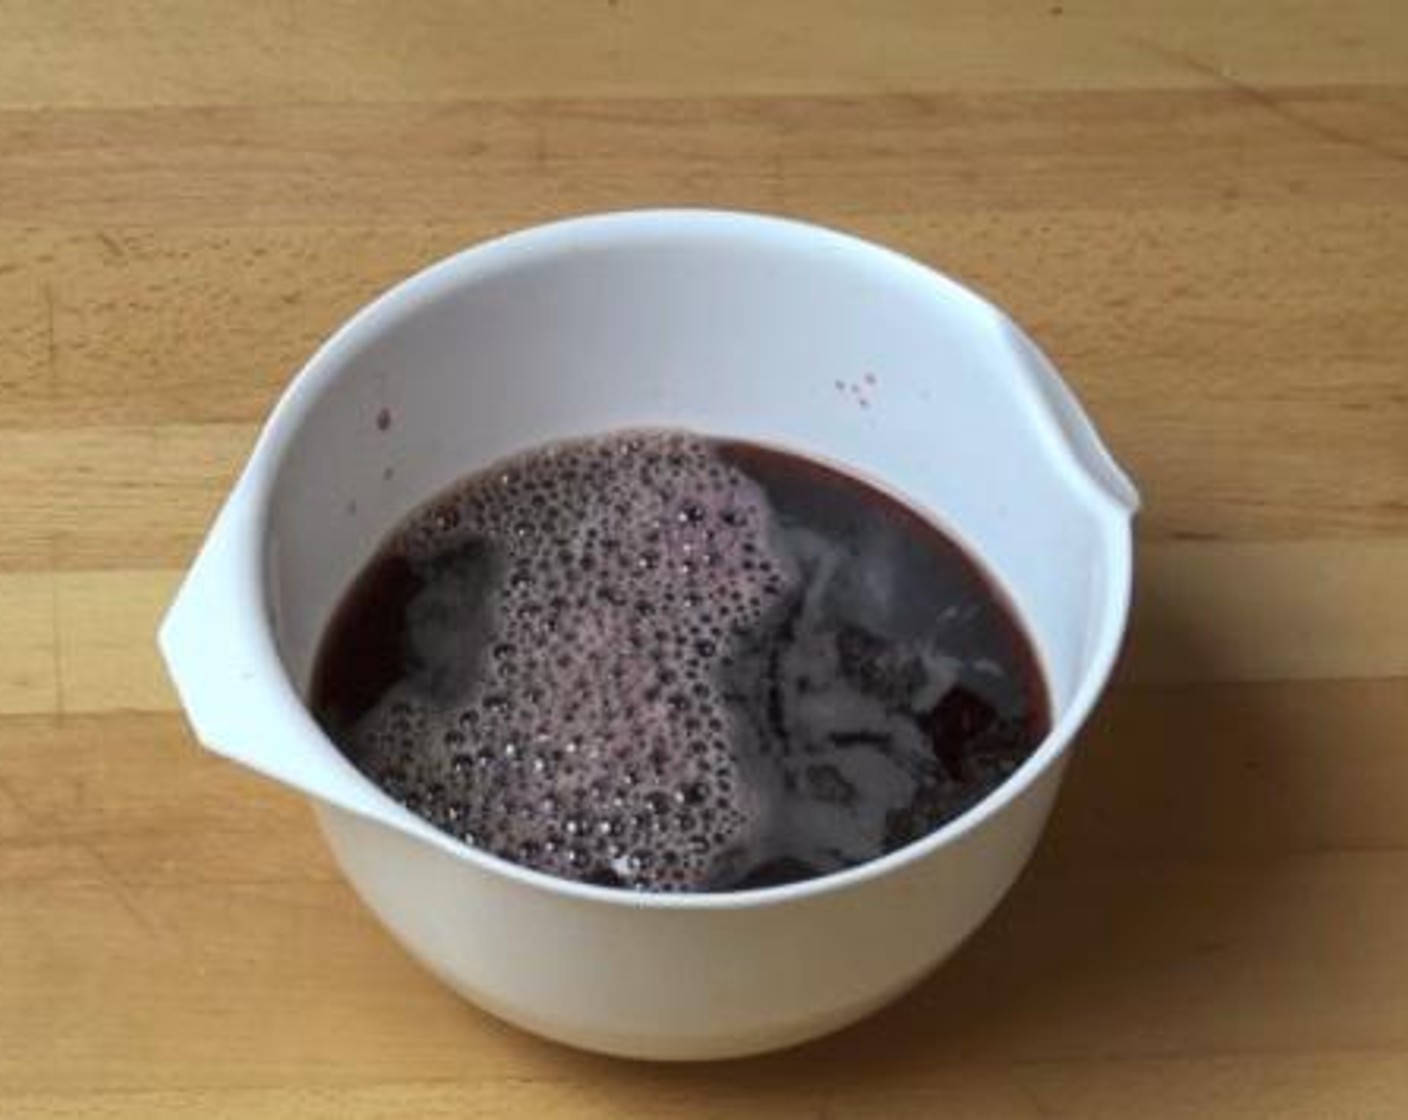 step 1 Drain off the syrup from the Canned Pitted Black Cherries in Heavy Syrup (1 2/3 cups). To the syrup, add and mix the Espresso (1 cup).